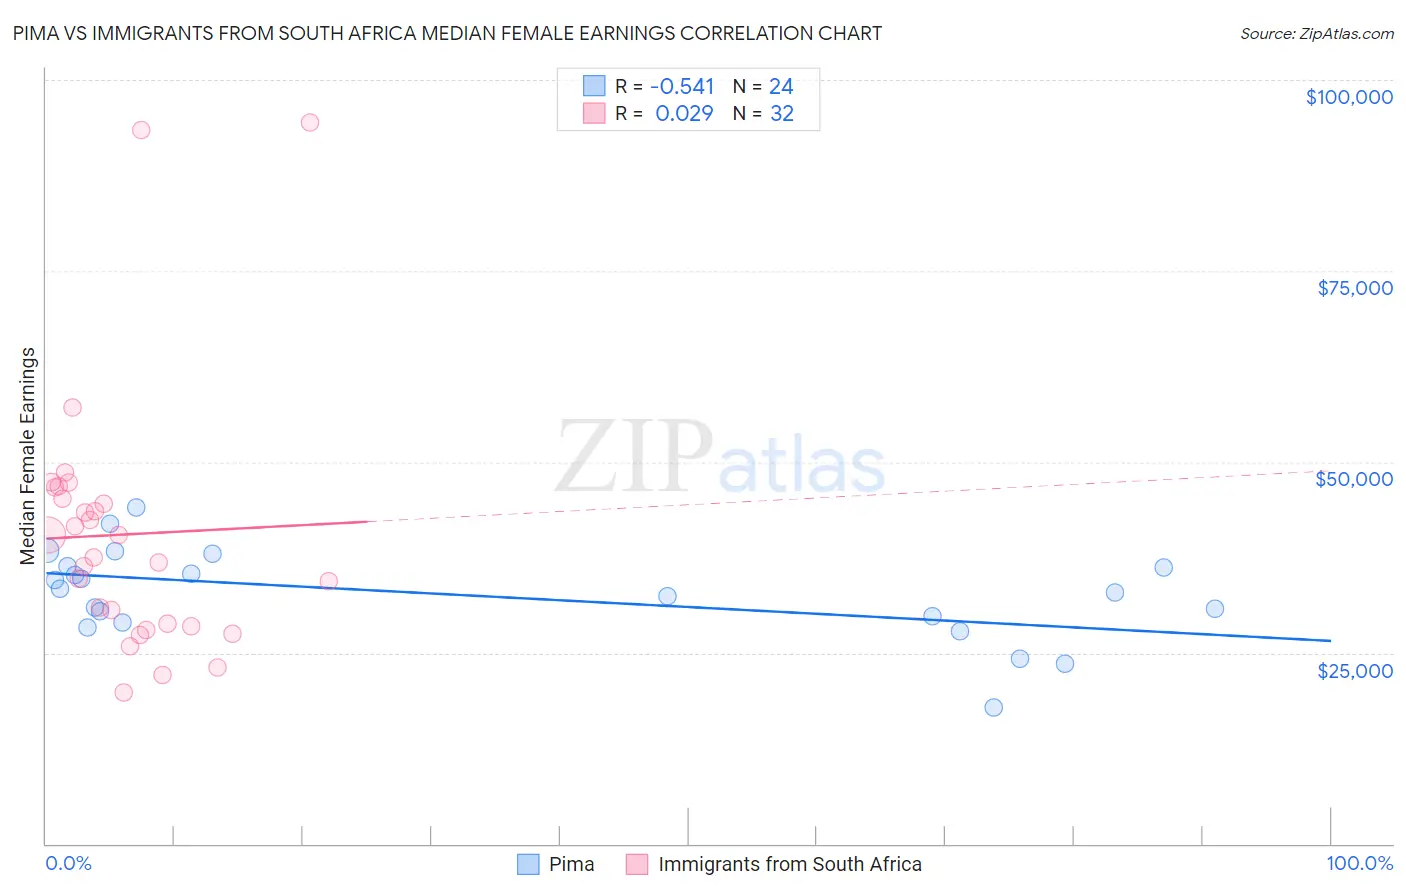 Pima vs Immigrants from South Africa Median Female Earnings